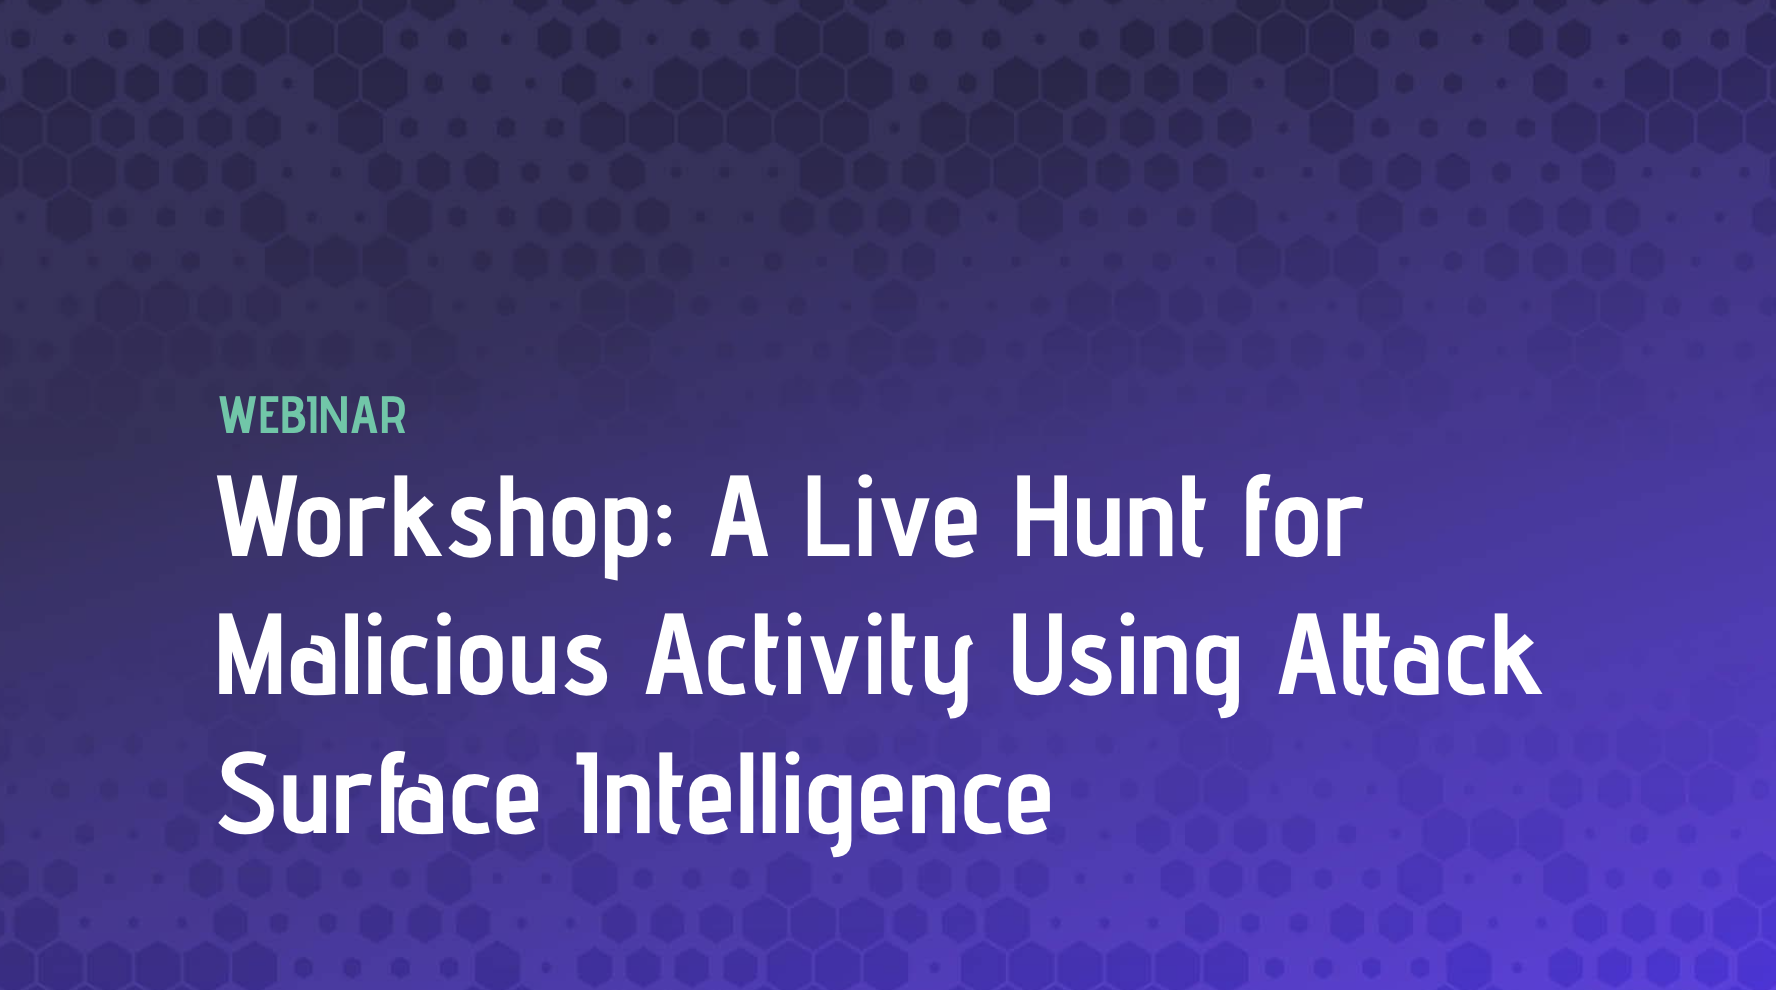 Workshop: A Live Hunt for Malicious Activity Using Attack Surface Intelligence